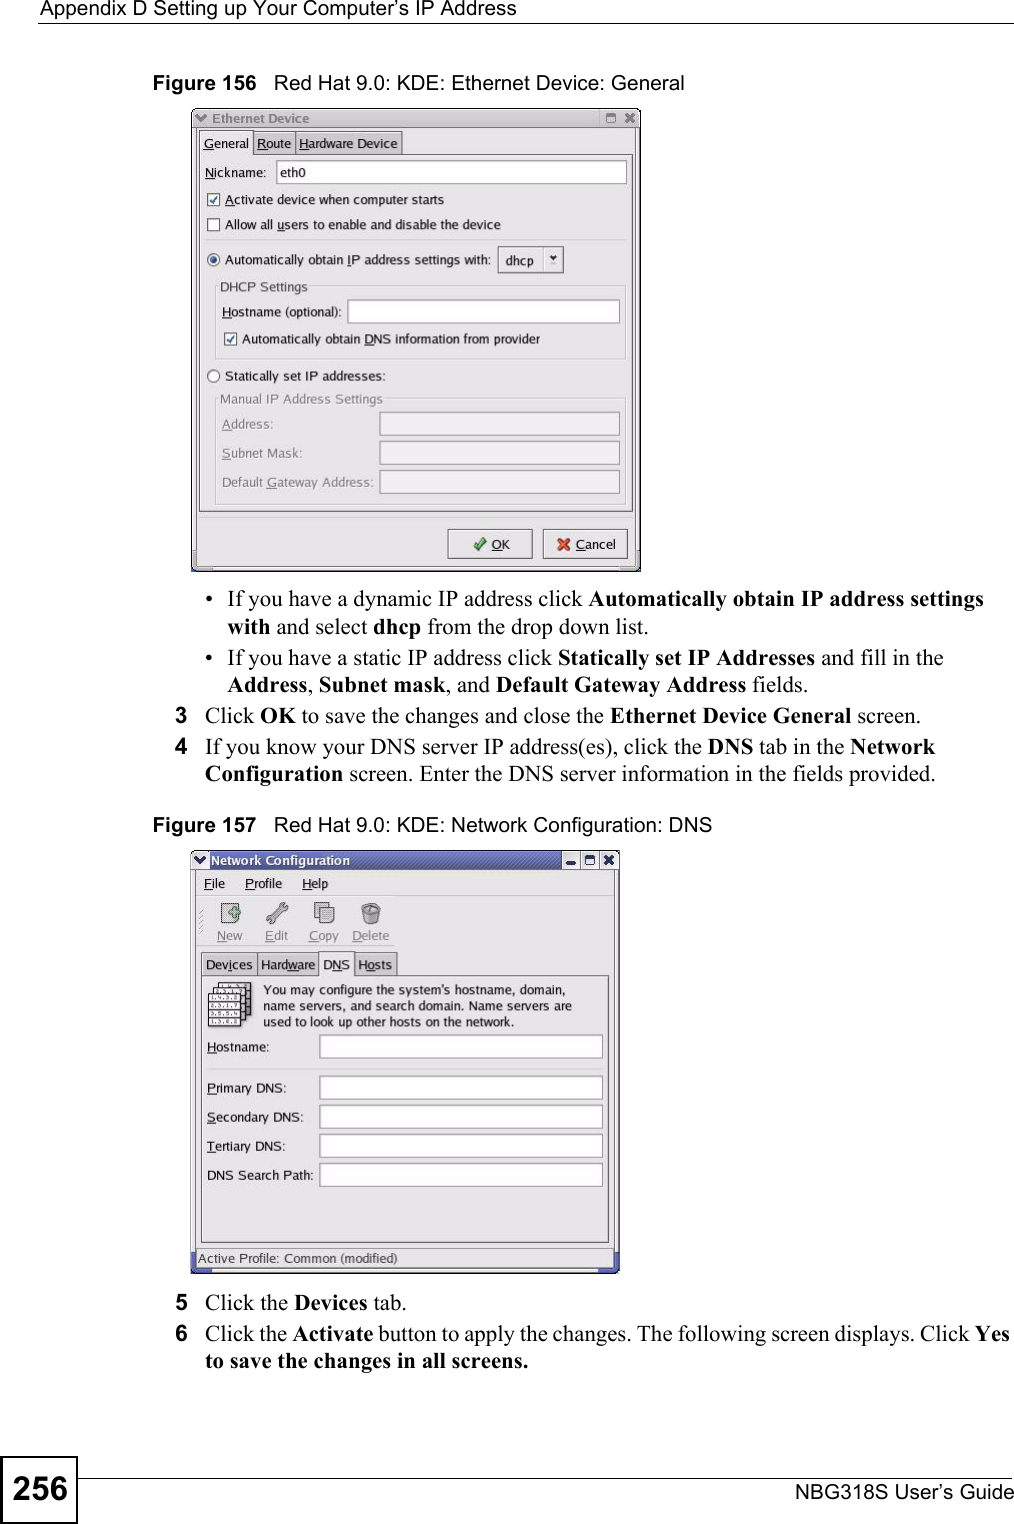 Appendix D Setting up Your Computer’s IP AddressNBG318S User’s Guide256Figure 156   Red Hat 9.0: KDE: Ethernet Device: General • If you have a dynamic IP address click Automatically obtain IP address settings with and select dhcp from the drop down list. • If you have a static IP address click Statically set IP Addresses and fill in the  Address, Subnet mask, and Default Gateway Address fields. 3Click OK to save the changes and close the Ethernet Device General screen. 4If you know your DNS server IP address(es), click the DNS tab in the Network Configuration screen. Enter the DNS server information in the fields provided. Figure 157   Red Hat 9.0: KDE: Network Configuration: DNS 5Click the Devices tab. 6Click the Activate button to apply the changes. The following screen displays. Click Yes to save the changes in all screens.